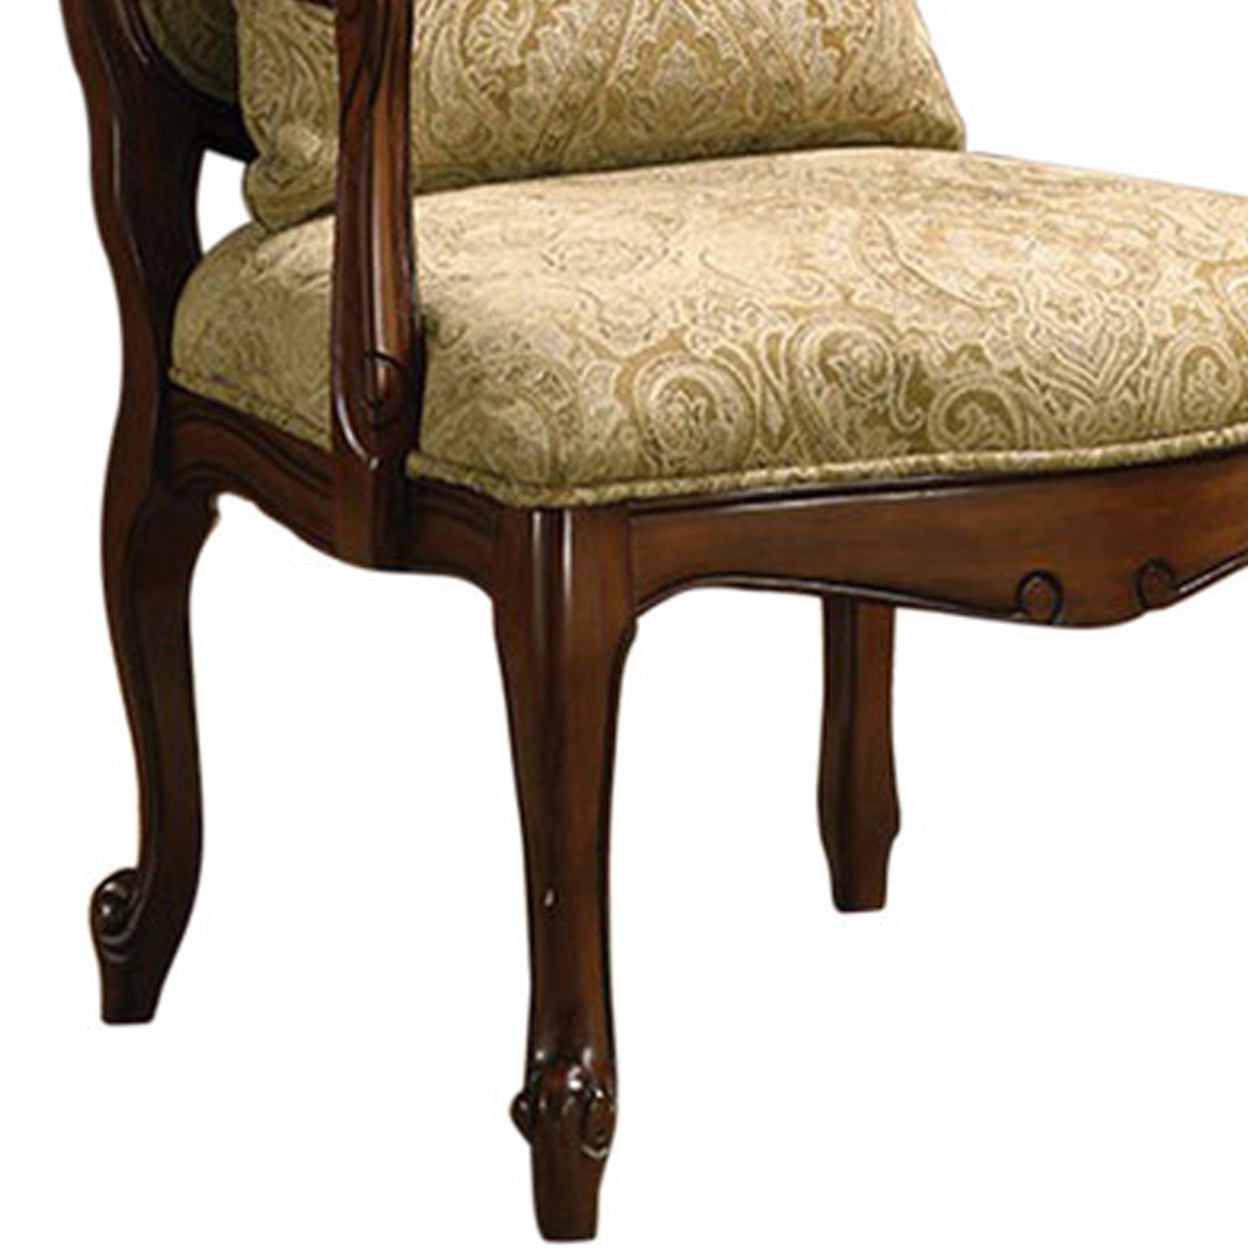 Textured Fabric Accent Chair With Padded Armrests, Brown And Beige- Saltoro Sherpi